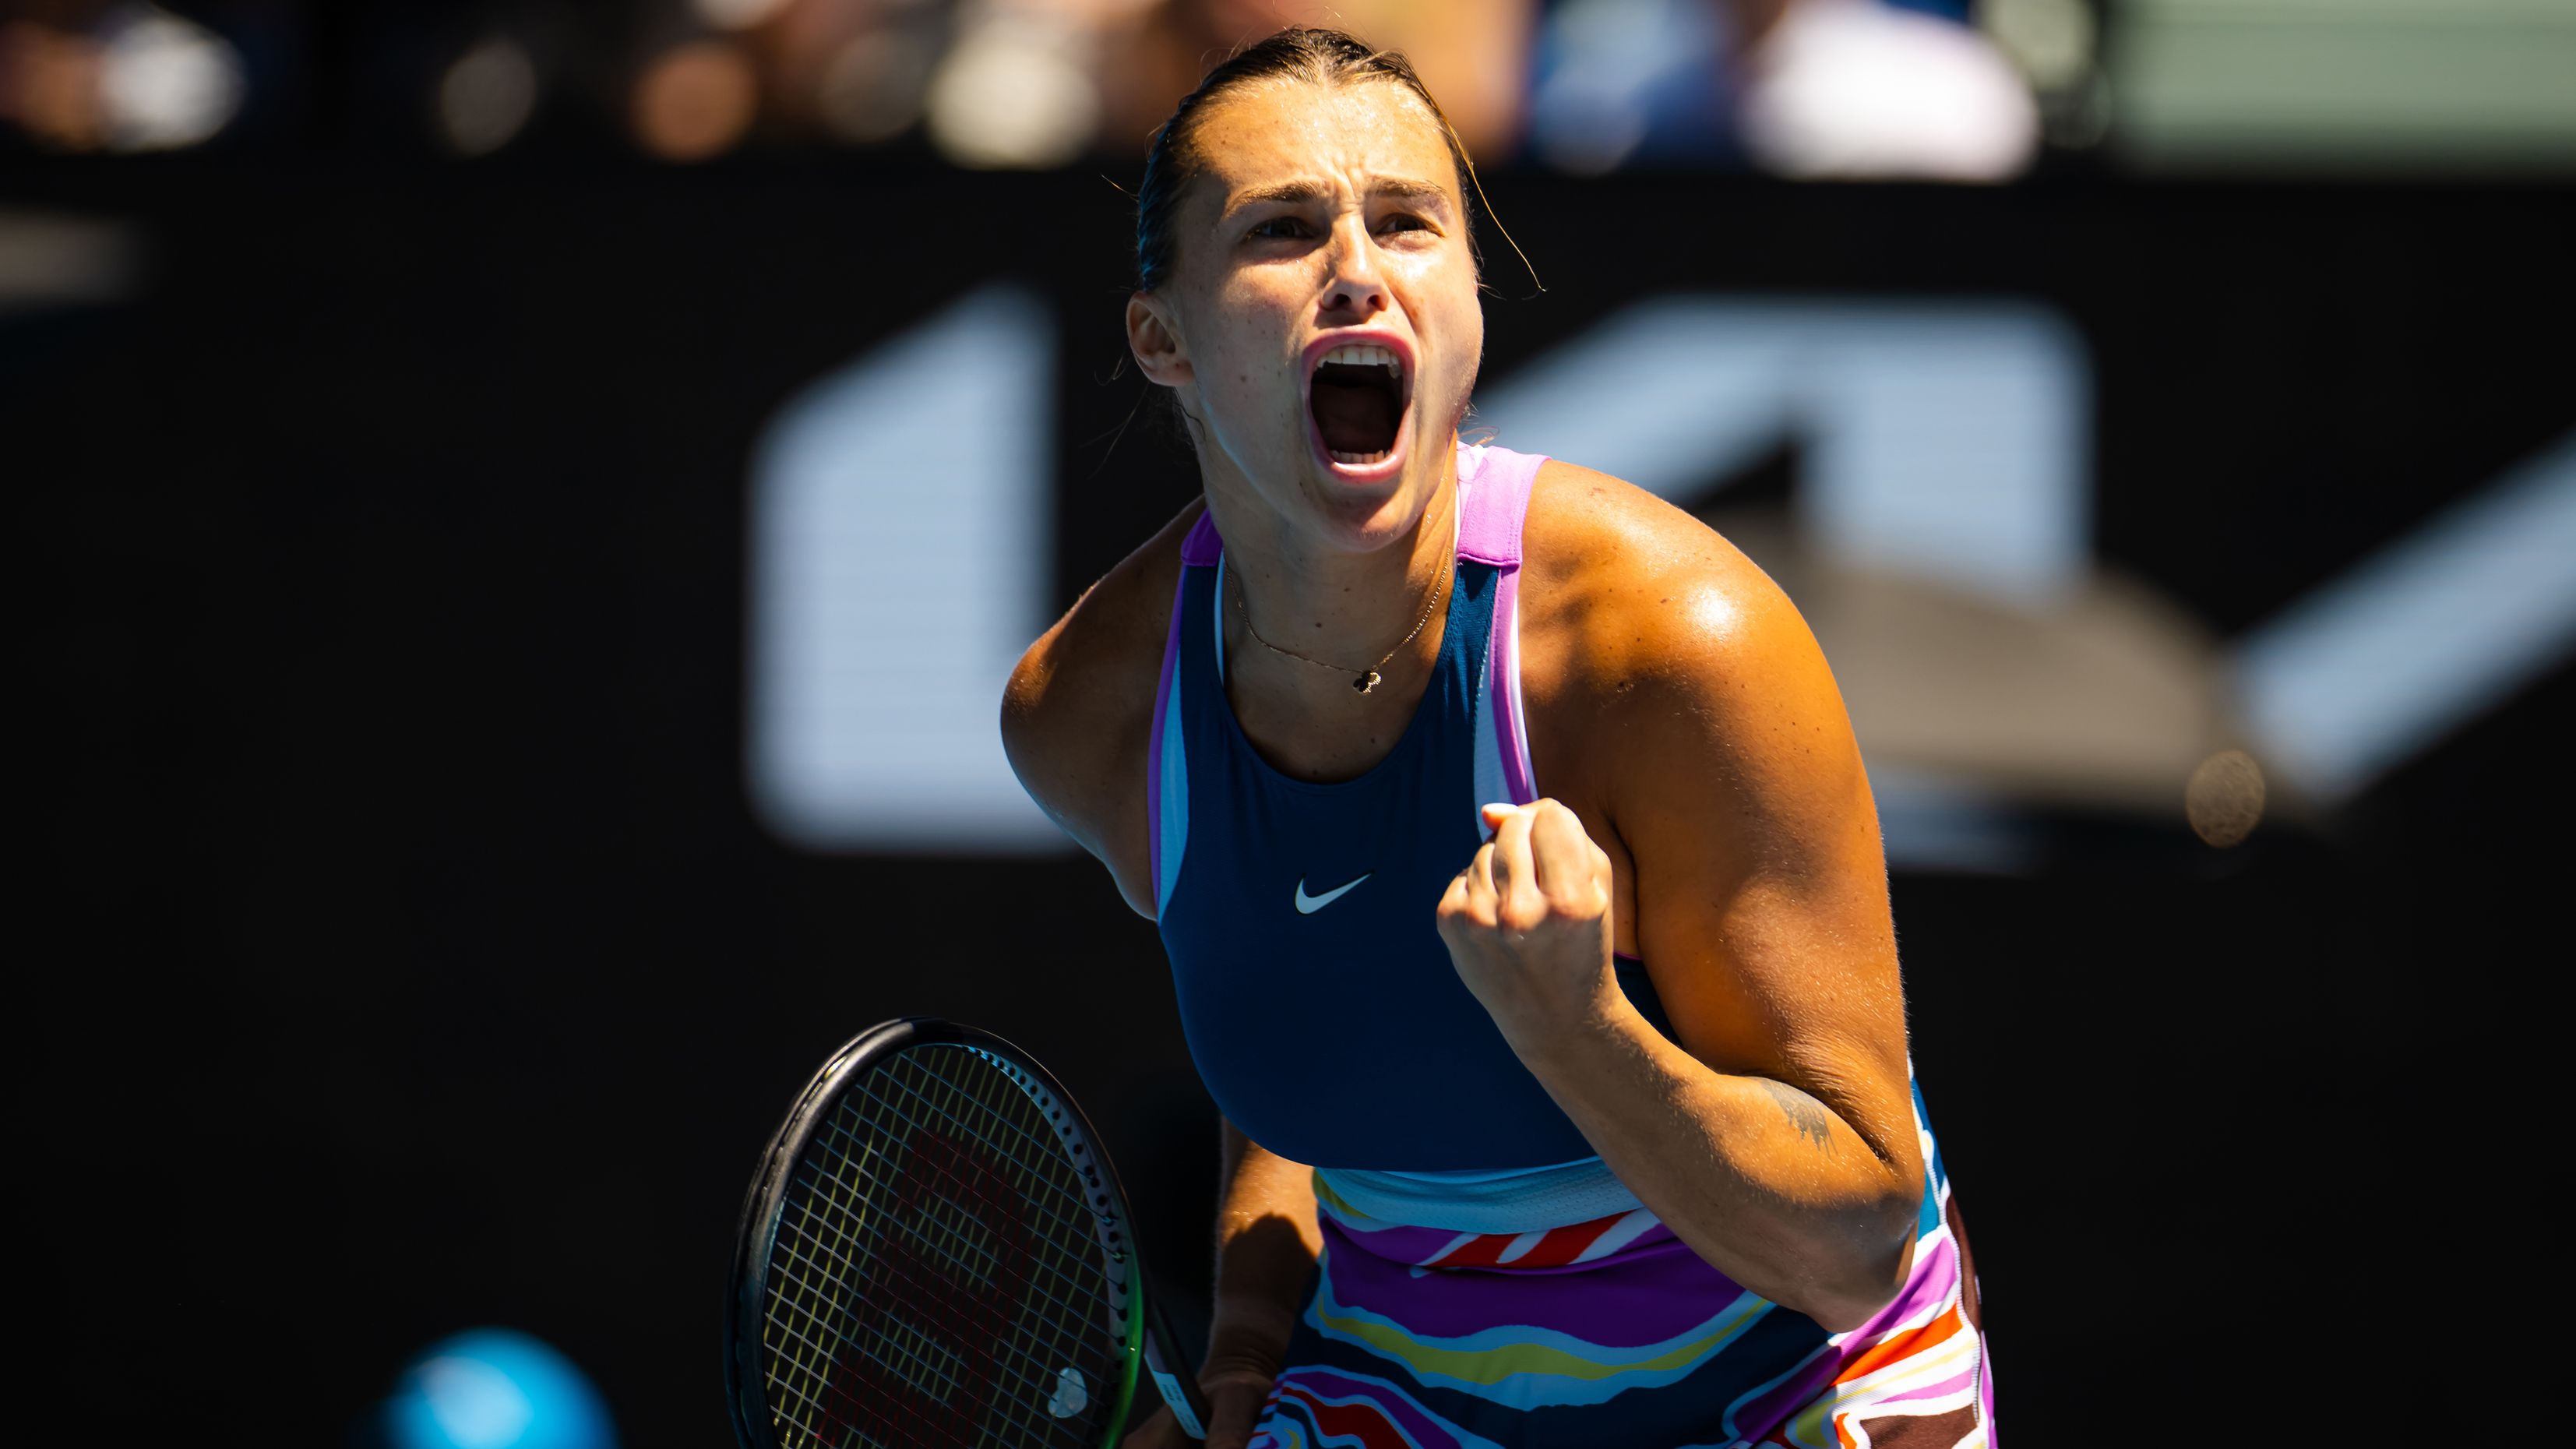 MELBOURNE, AUSTRALIA - JANUARY 23: Aryna Sabalenka of Belarus in action against Belinda Bencic of Switzerland during her fourth round match on Day 8 of the 2023 Australian Open at Melbourne Park on January 23, 2023 in Melbourne, Australia (Photo by Robert Prange/Getty Images)